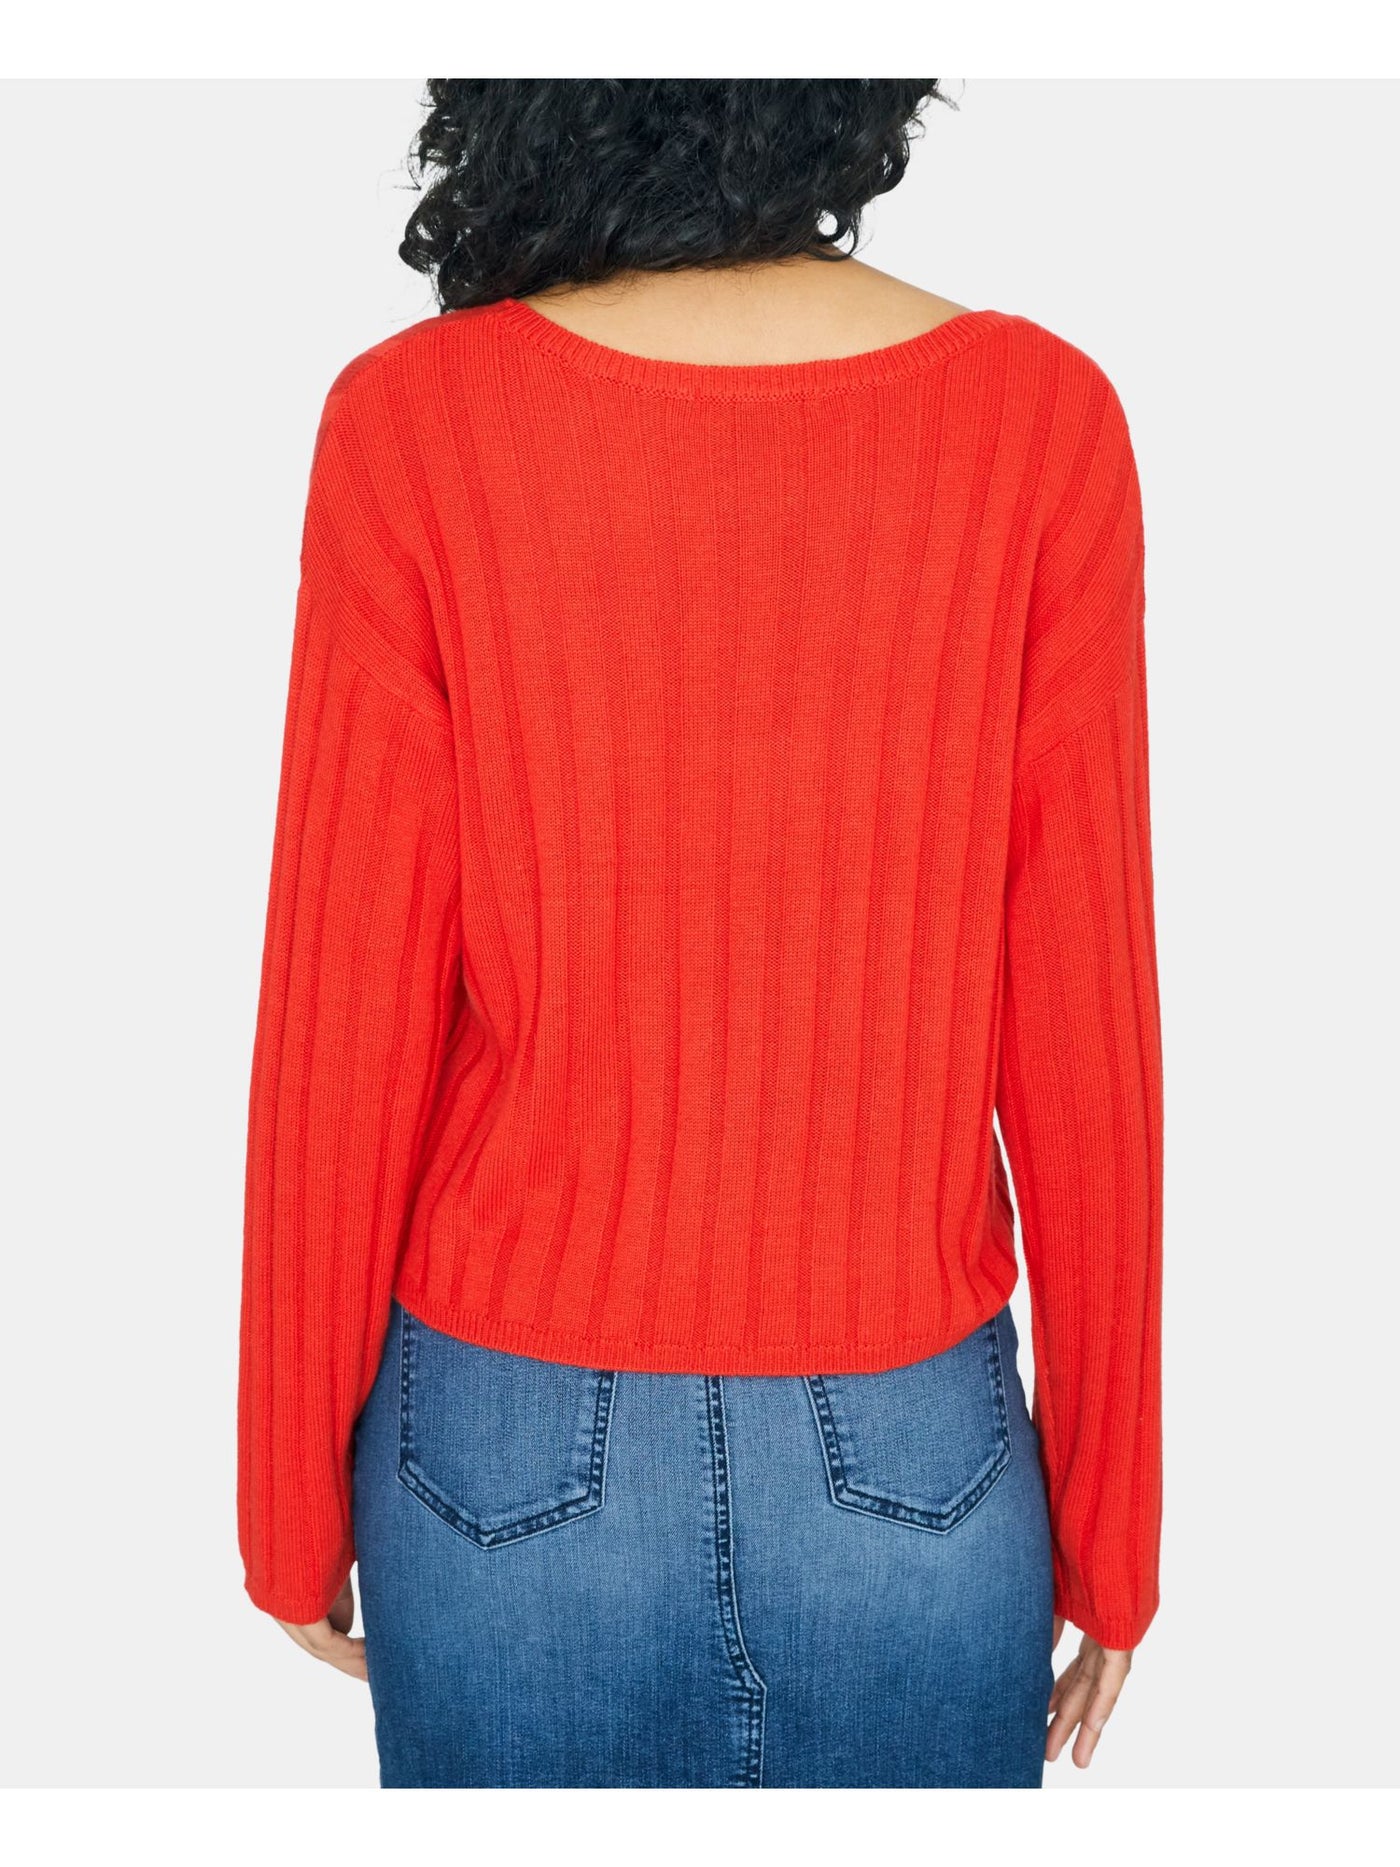 SANCTUARY Womens Red Ribbed Long Sleeve Jewel Neck Sweater S